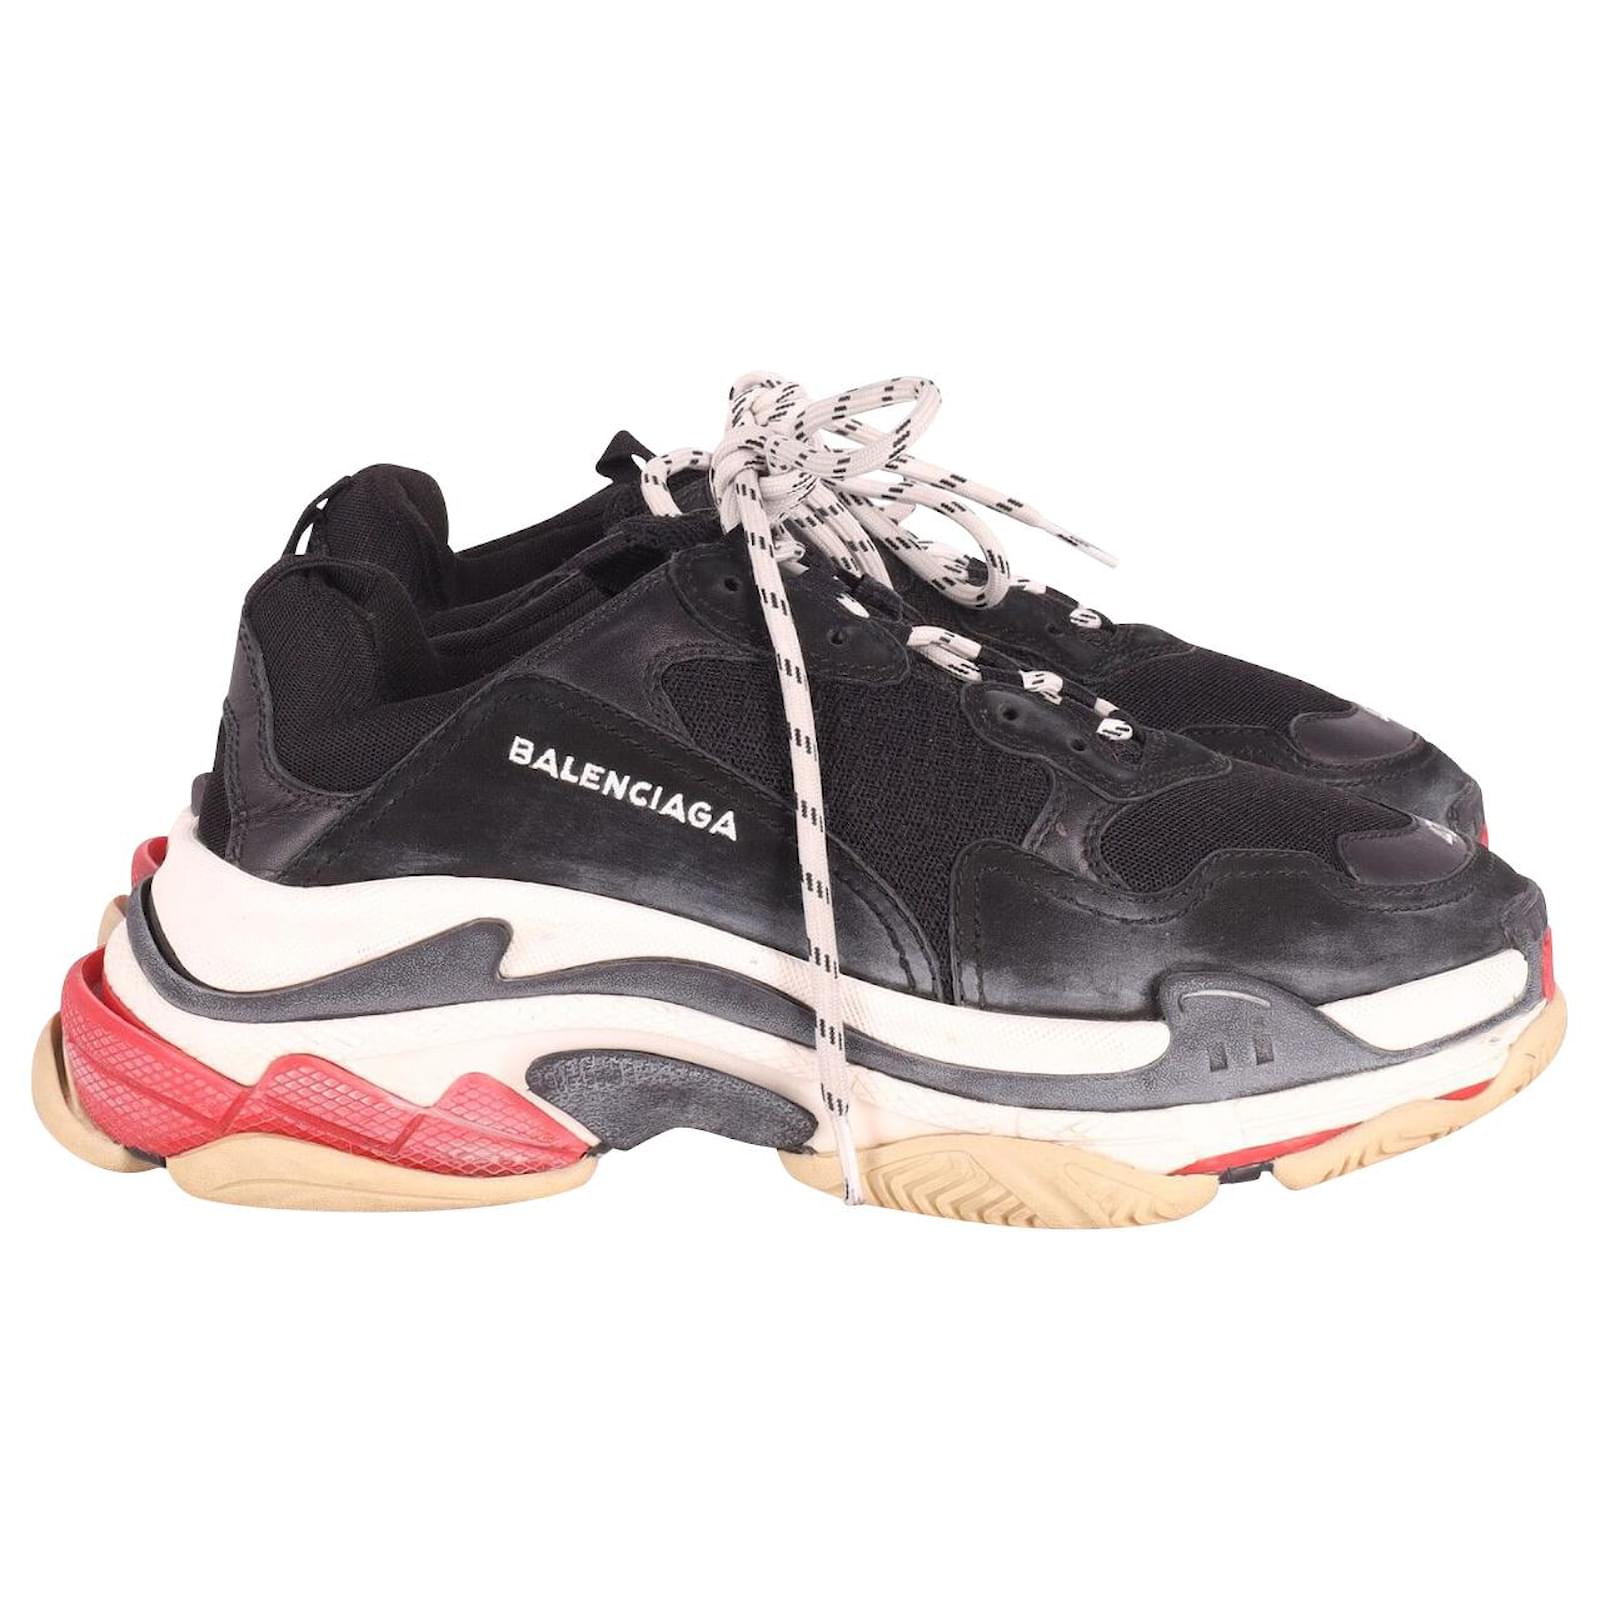 Balenciaga Triple S Sneakers in Black Red Leather and Mesh ref